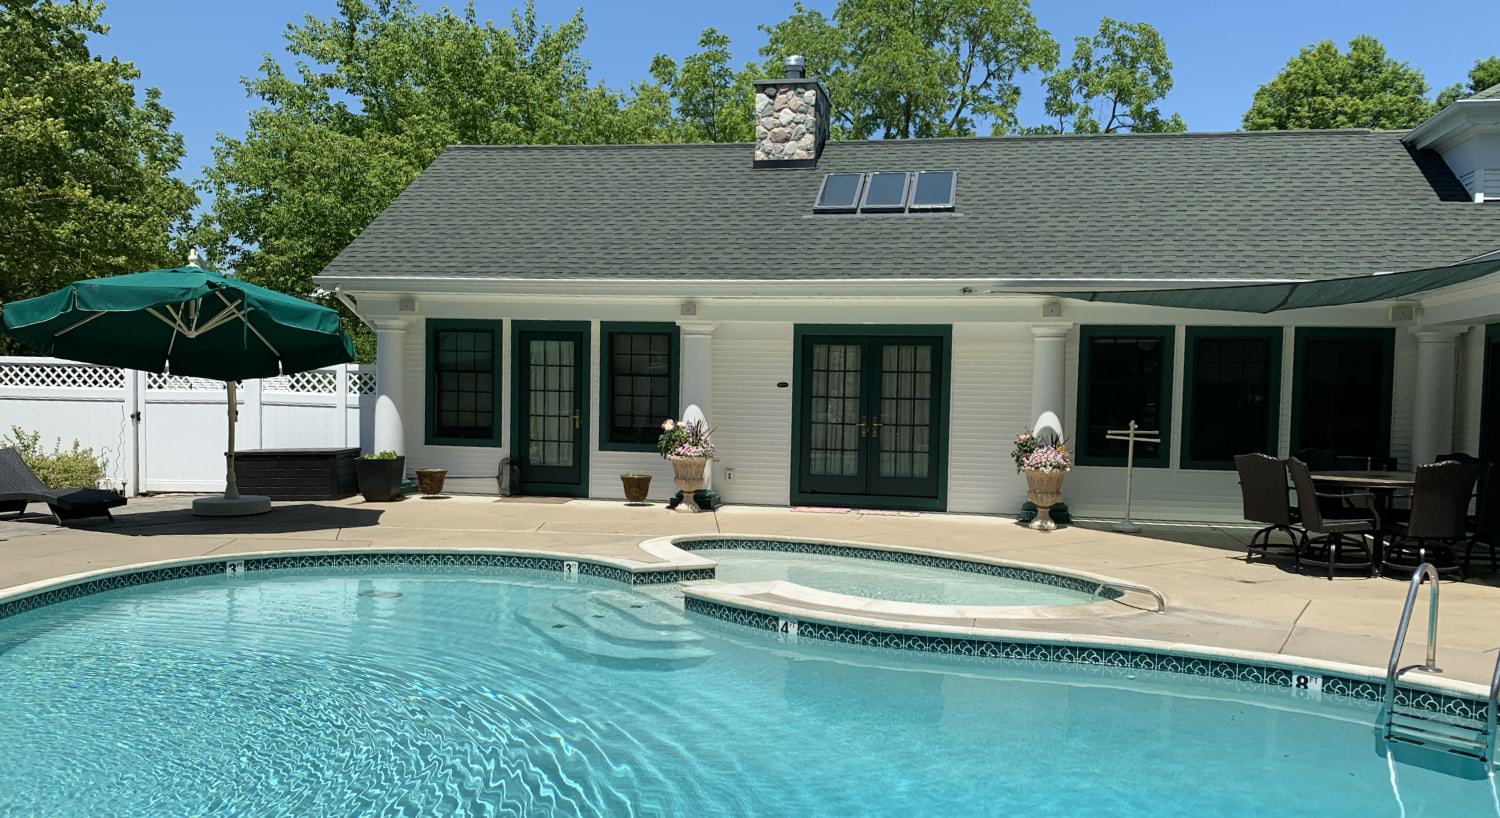 Exterior view of the property painted white with dark trim next to a large swimming pool with hot tub